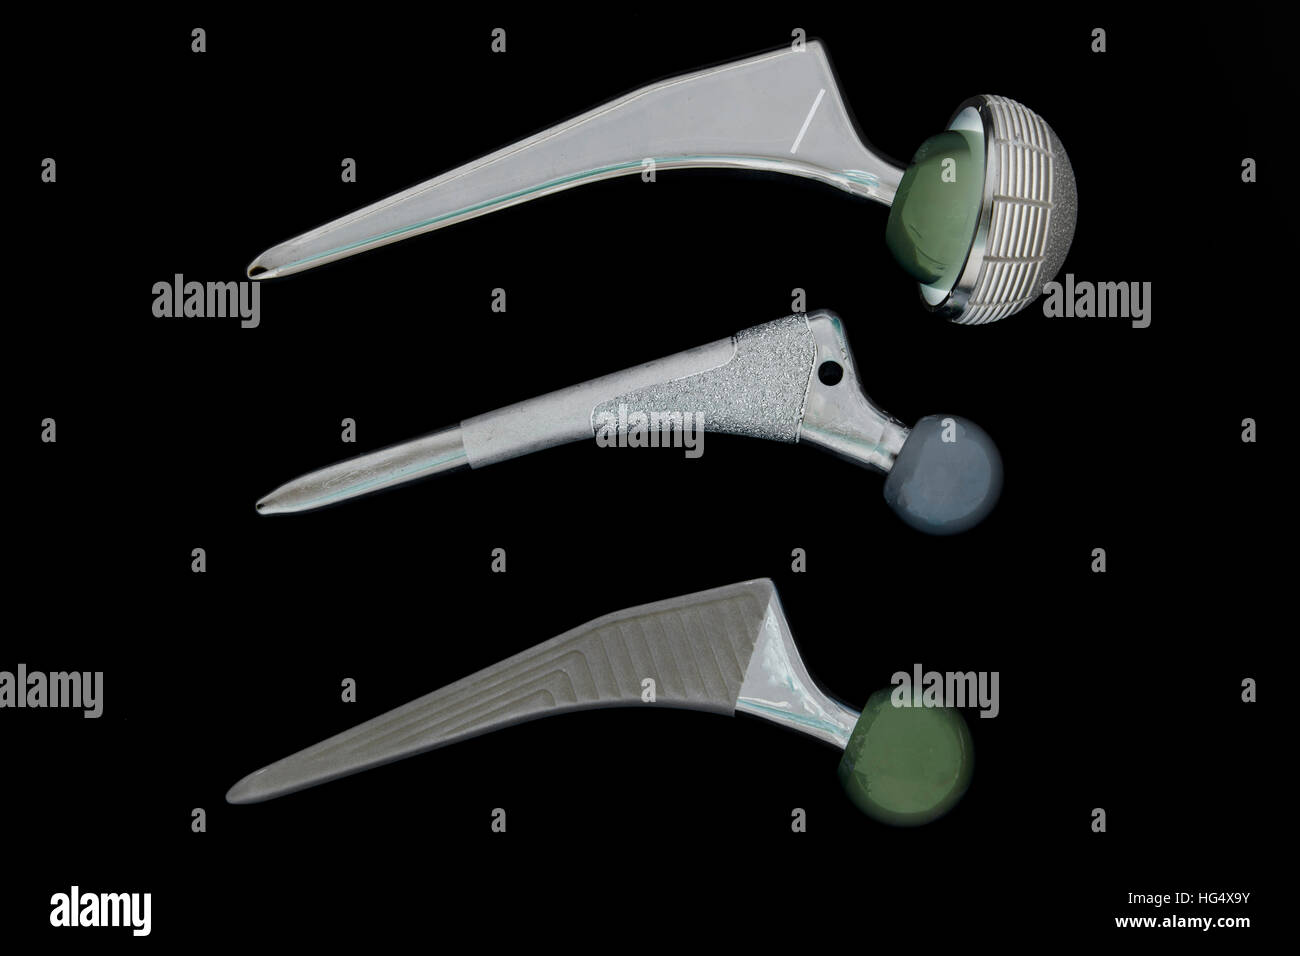 Endoprosthesis, artificial hip joint, consists of the hip stem, ball head, hip socket with pans insert, Stock Photo